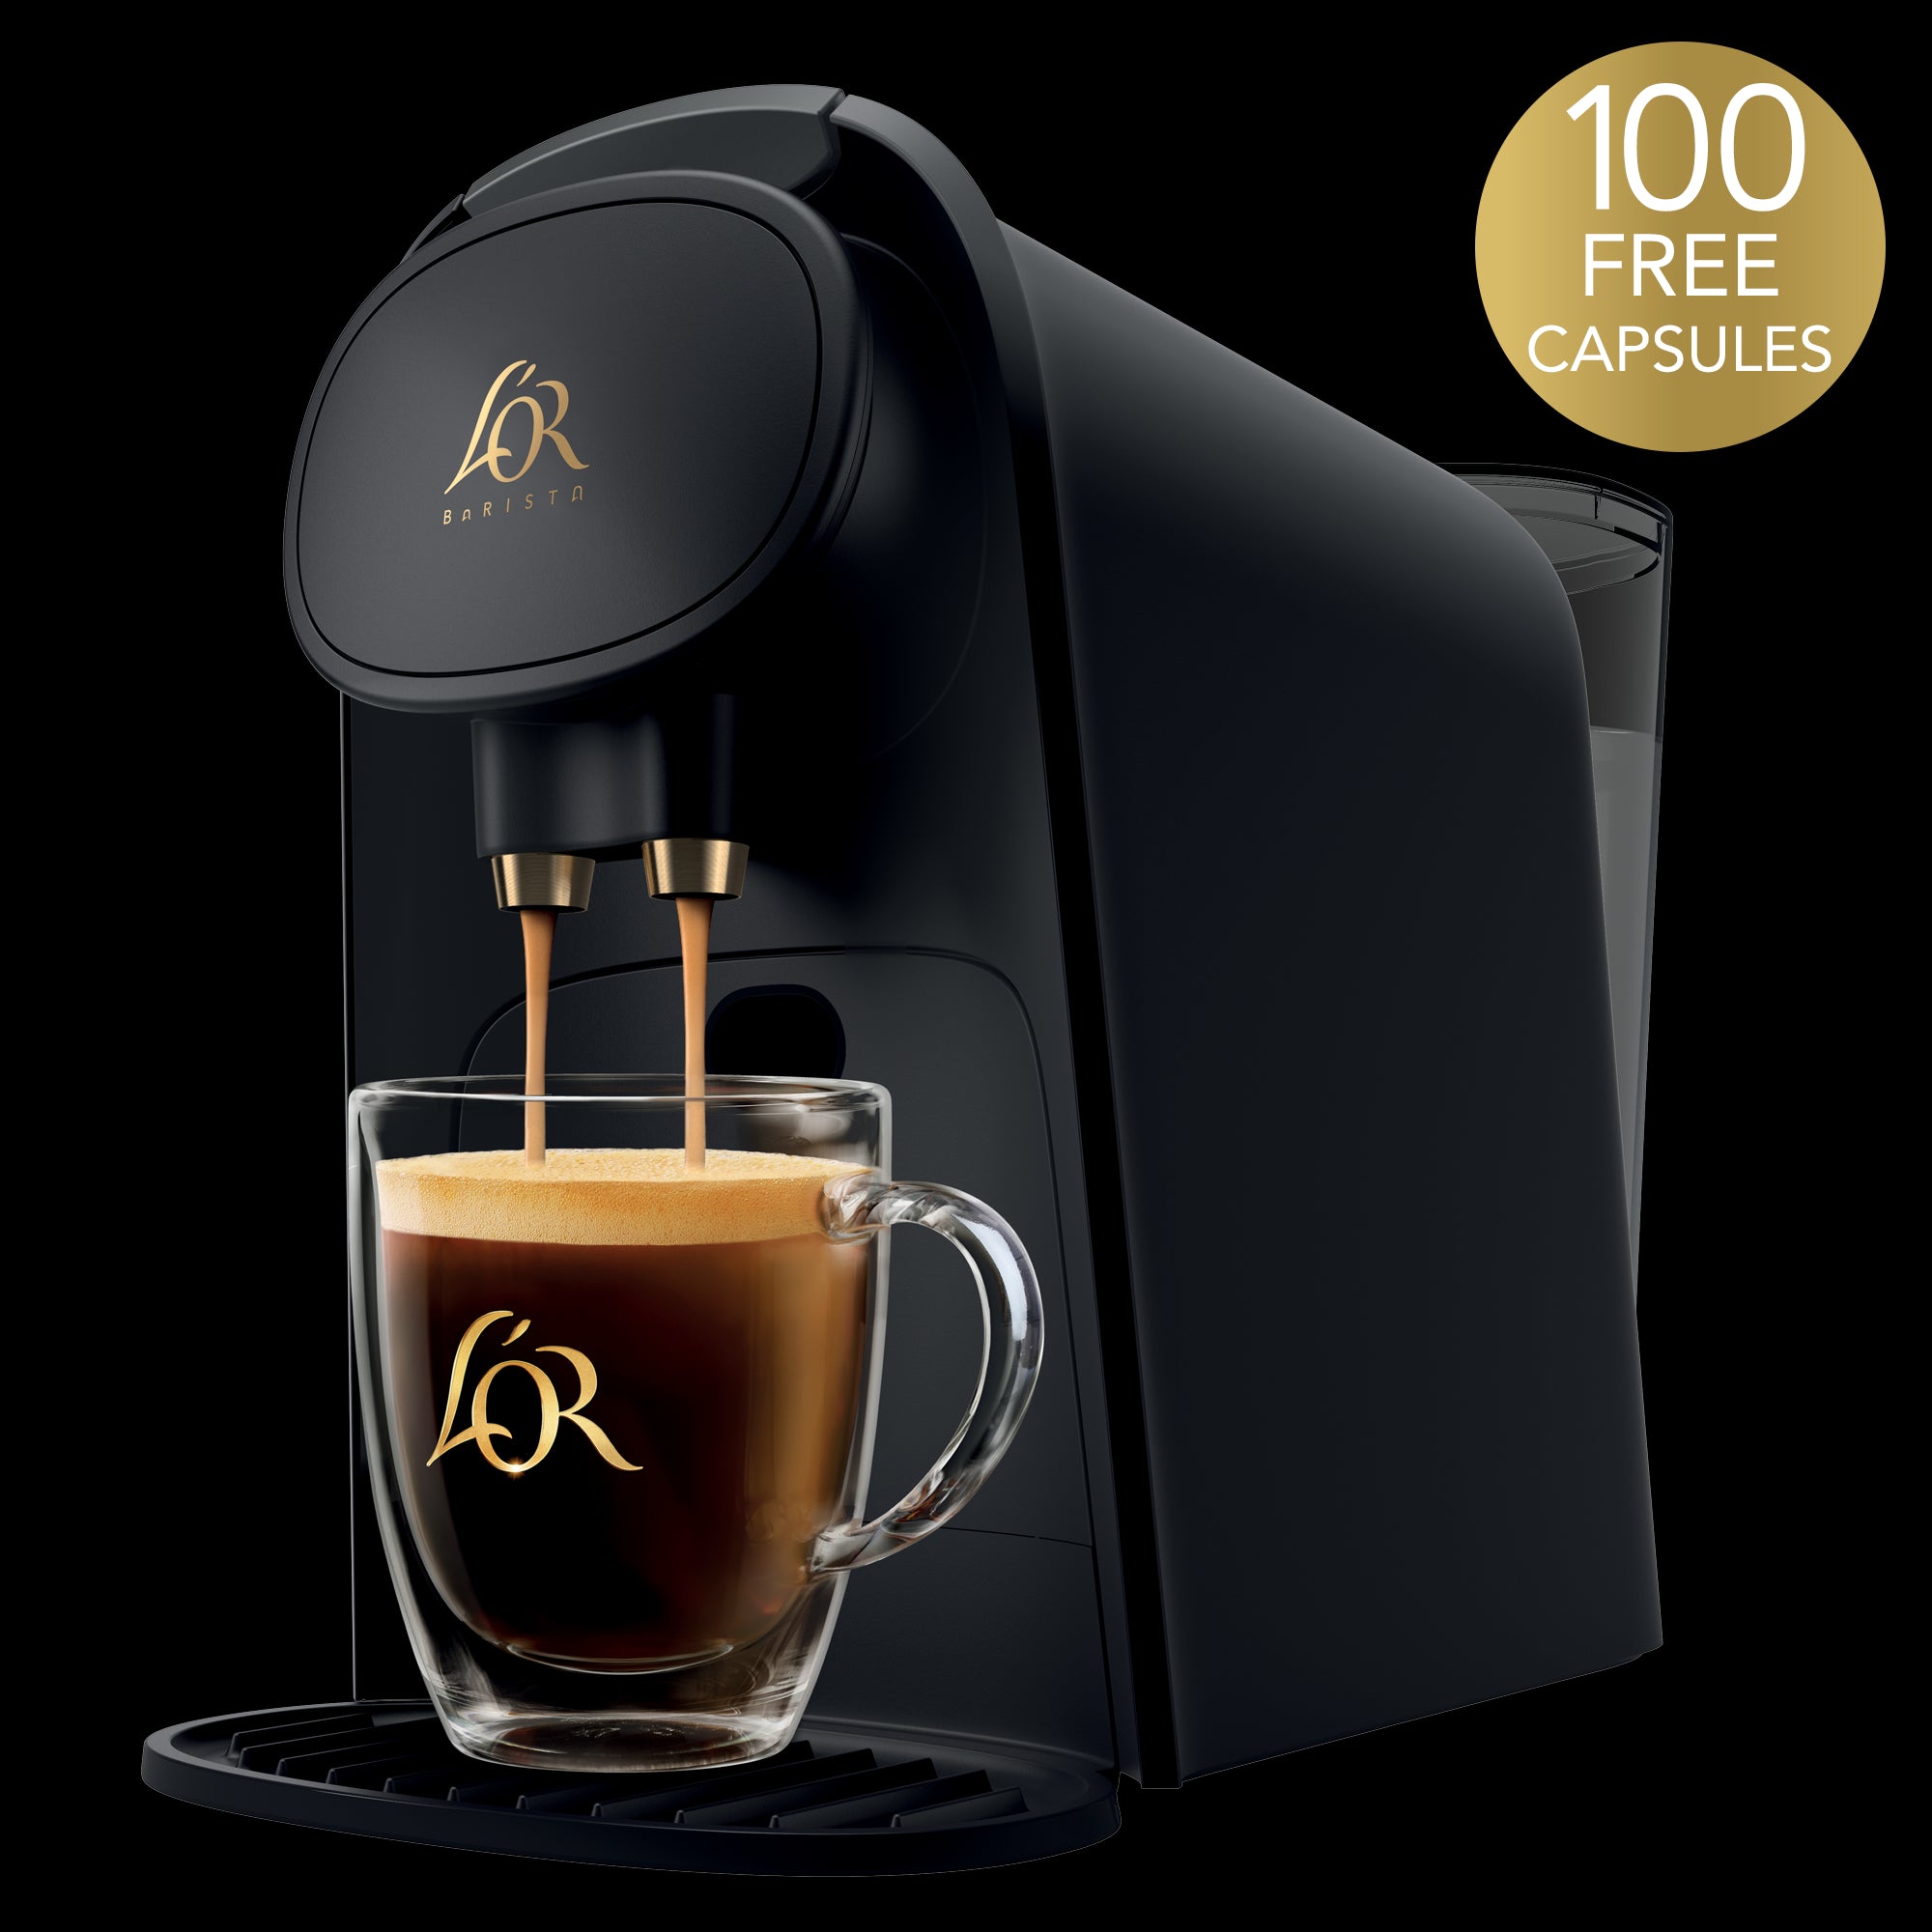 L'OR BARISTA System Bundle with 100 Free Capsules